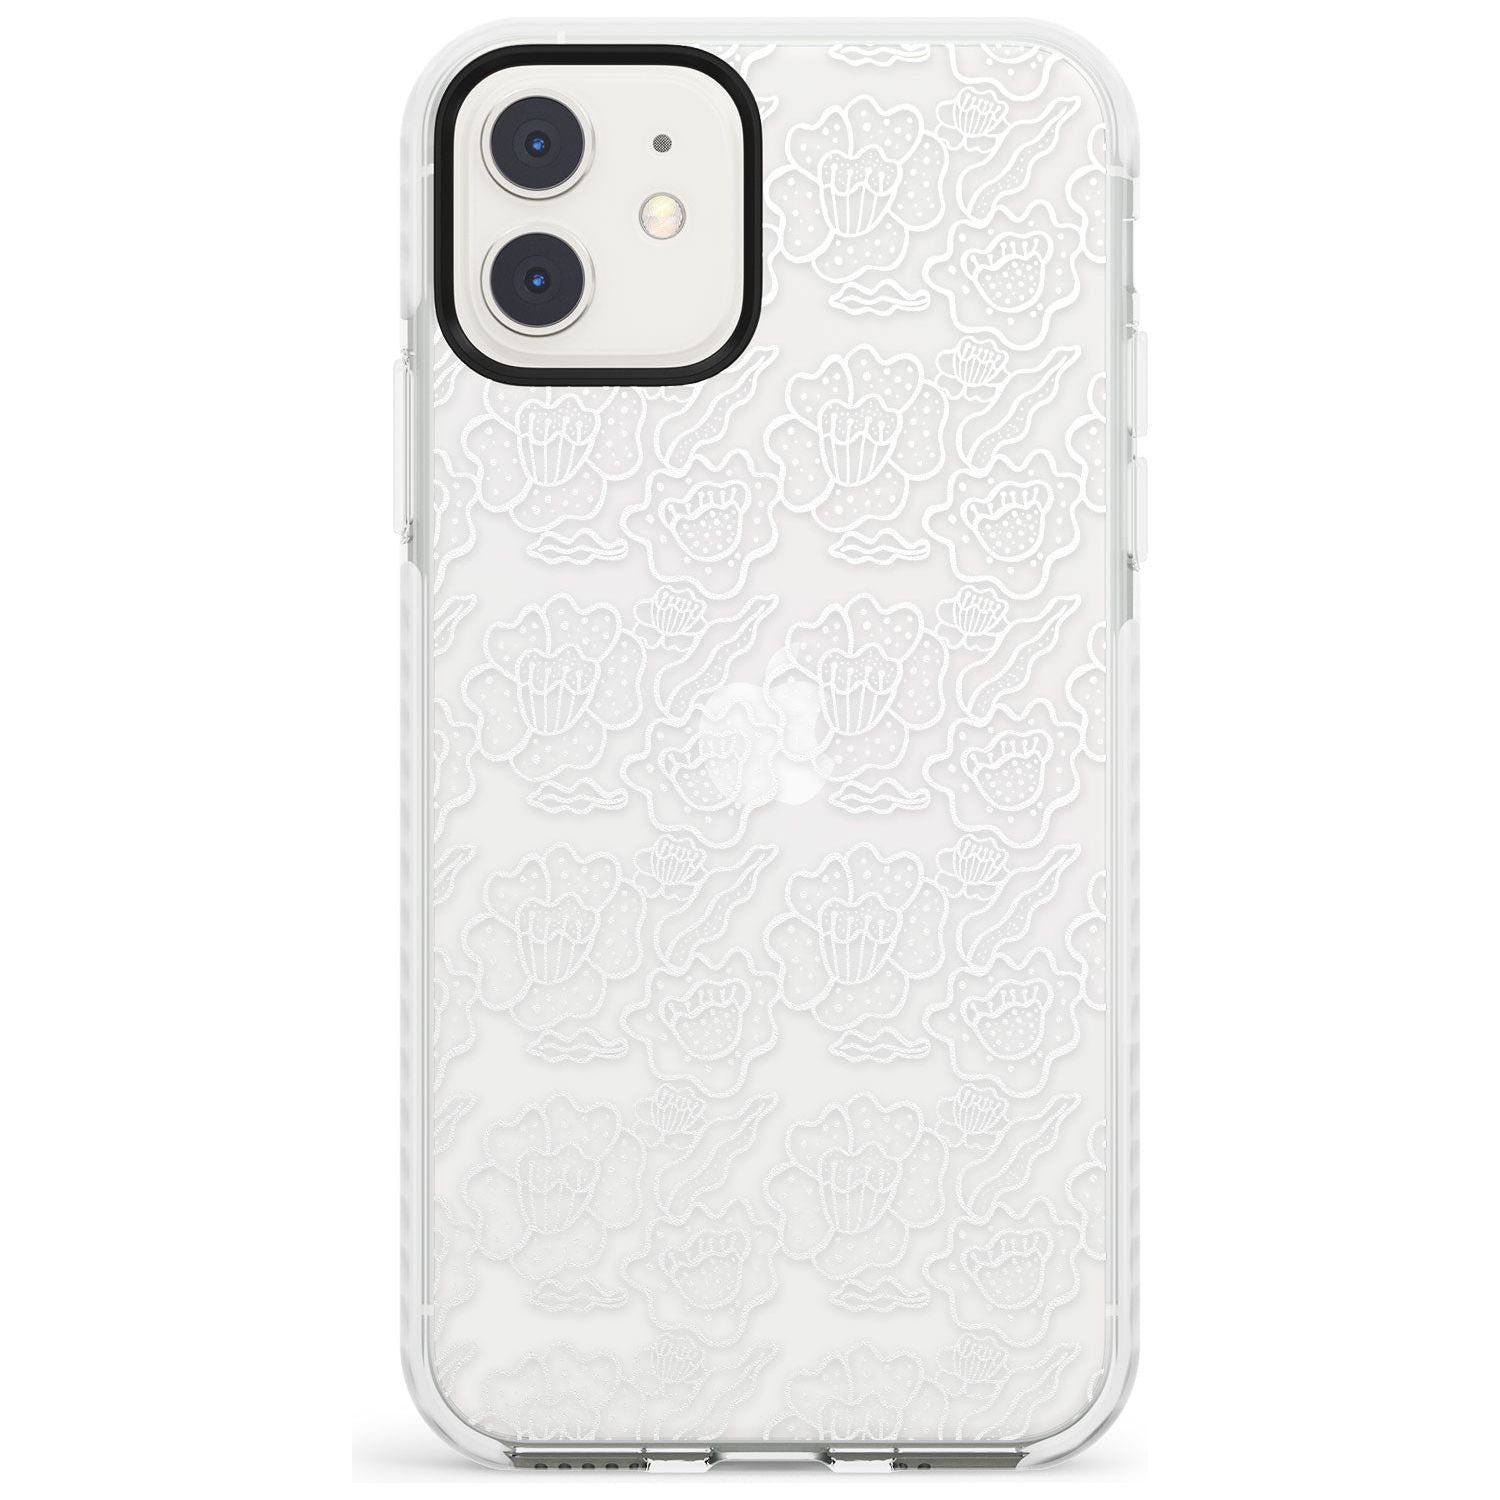 Funky Floral Patterns White on Clear Impact Phone Case for iPhone 11